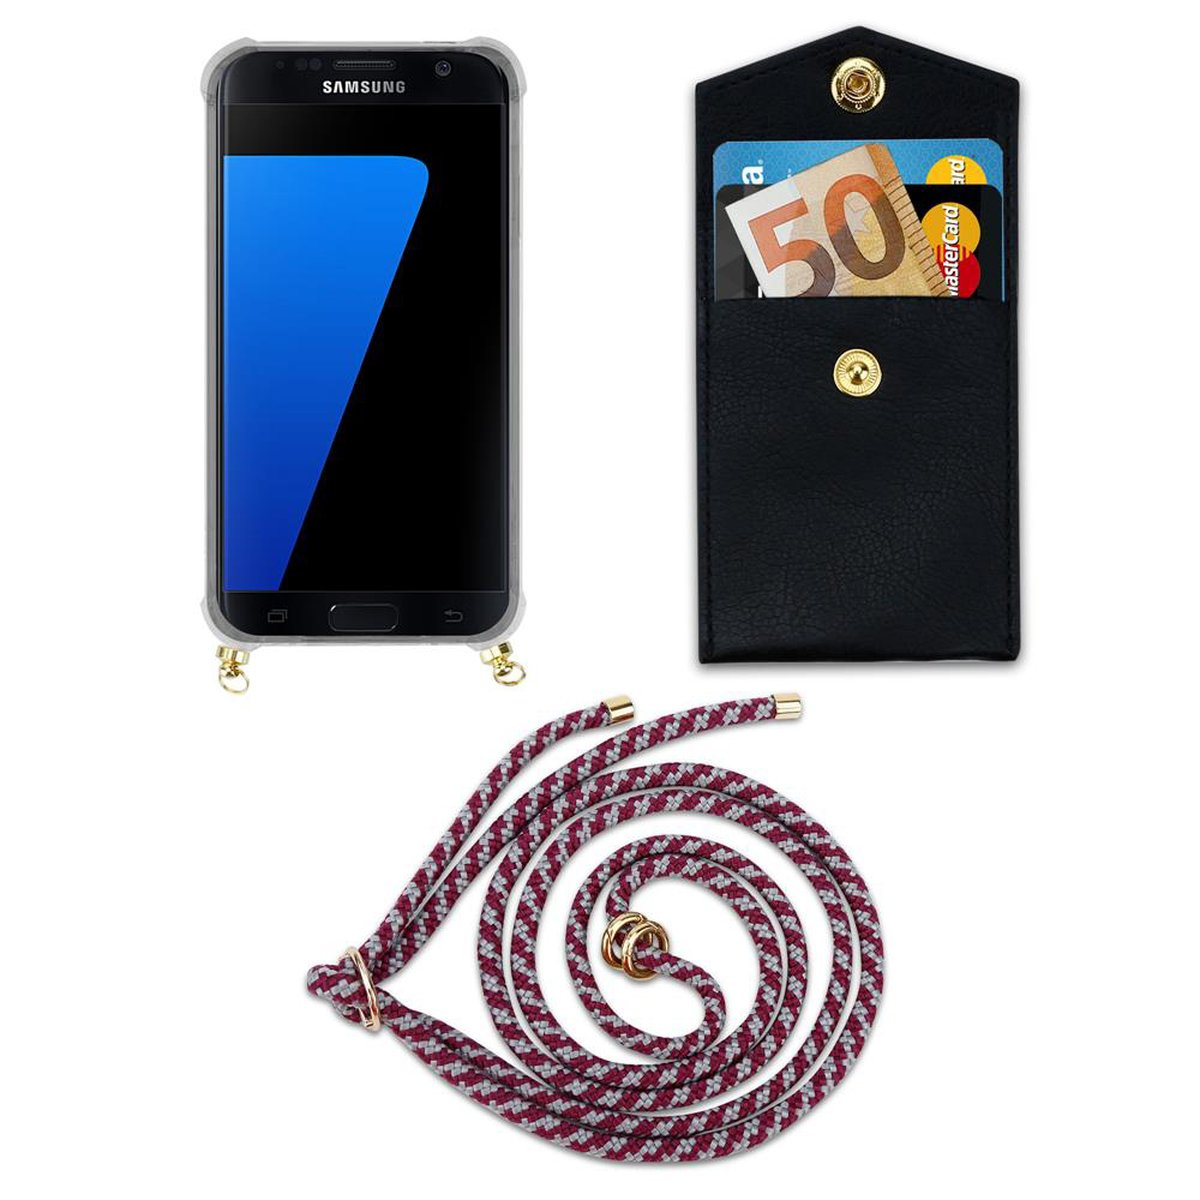 CADORABO Handy Samsung, ROT S7 EDGE, Gold Galaxy Ringen, WEIß Hülle, abnehmbarer Kette Kordel mit Band Backcover, und